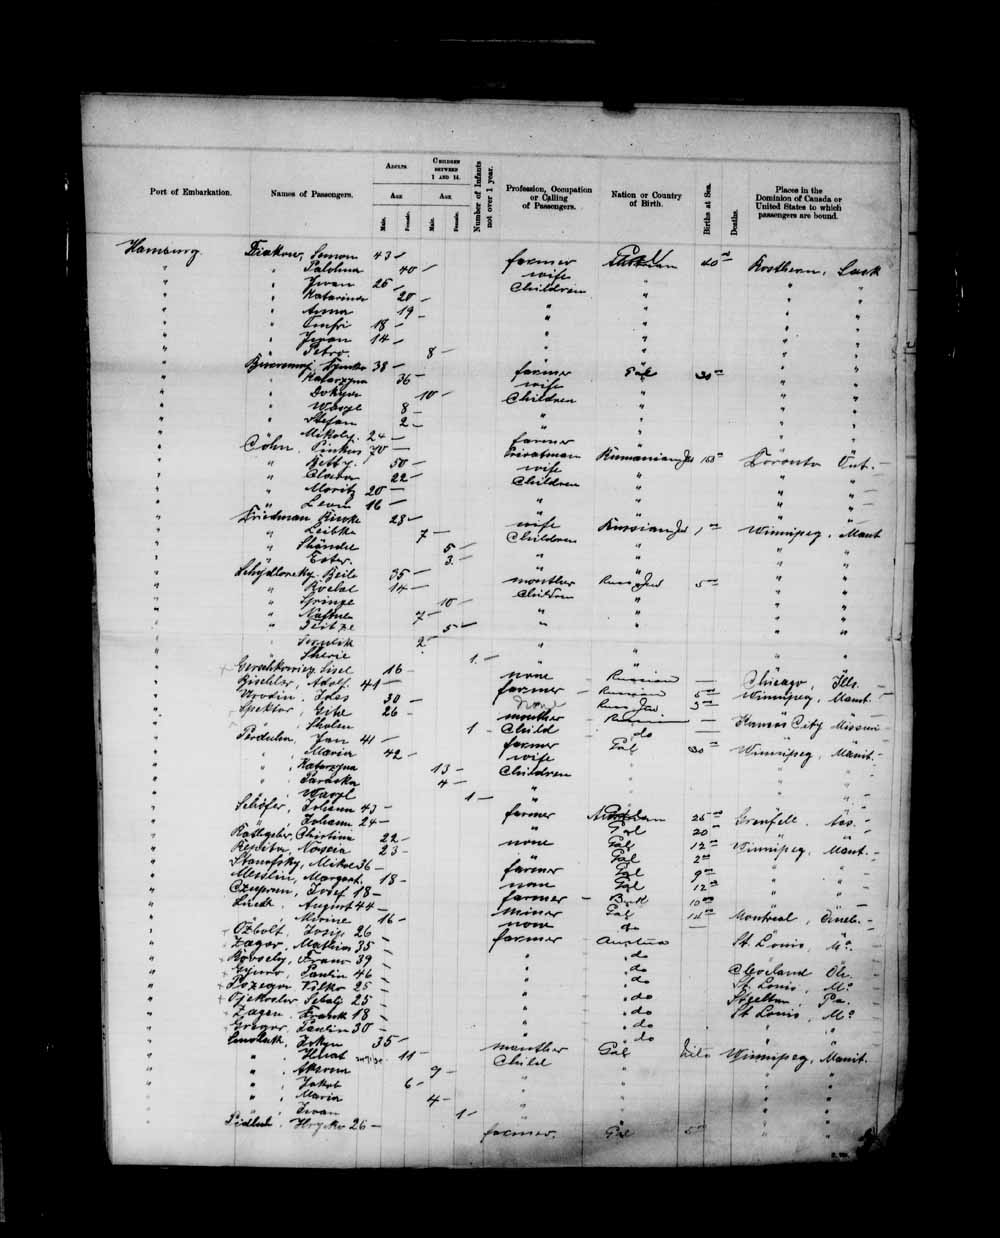 Digitized page of Passenger Lists for Image No.: e003691368